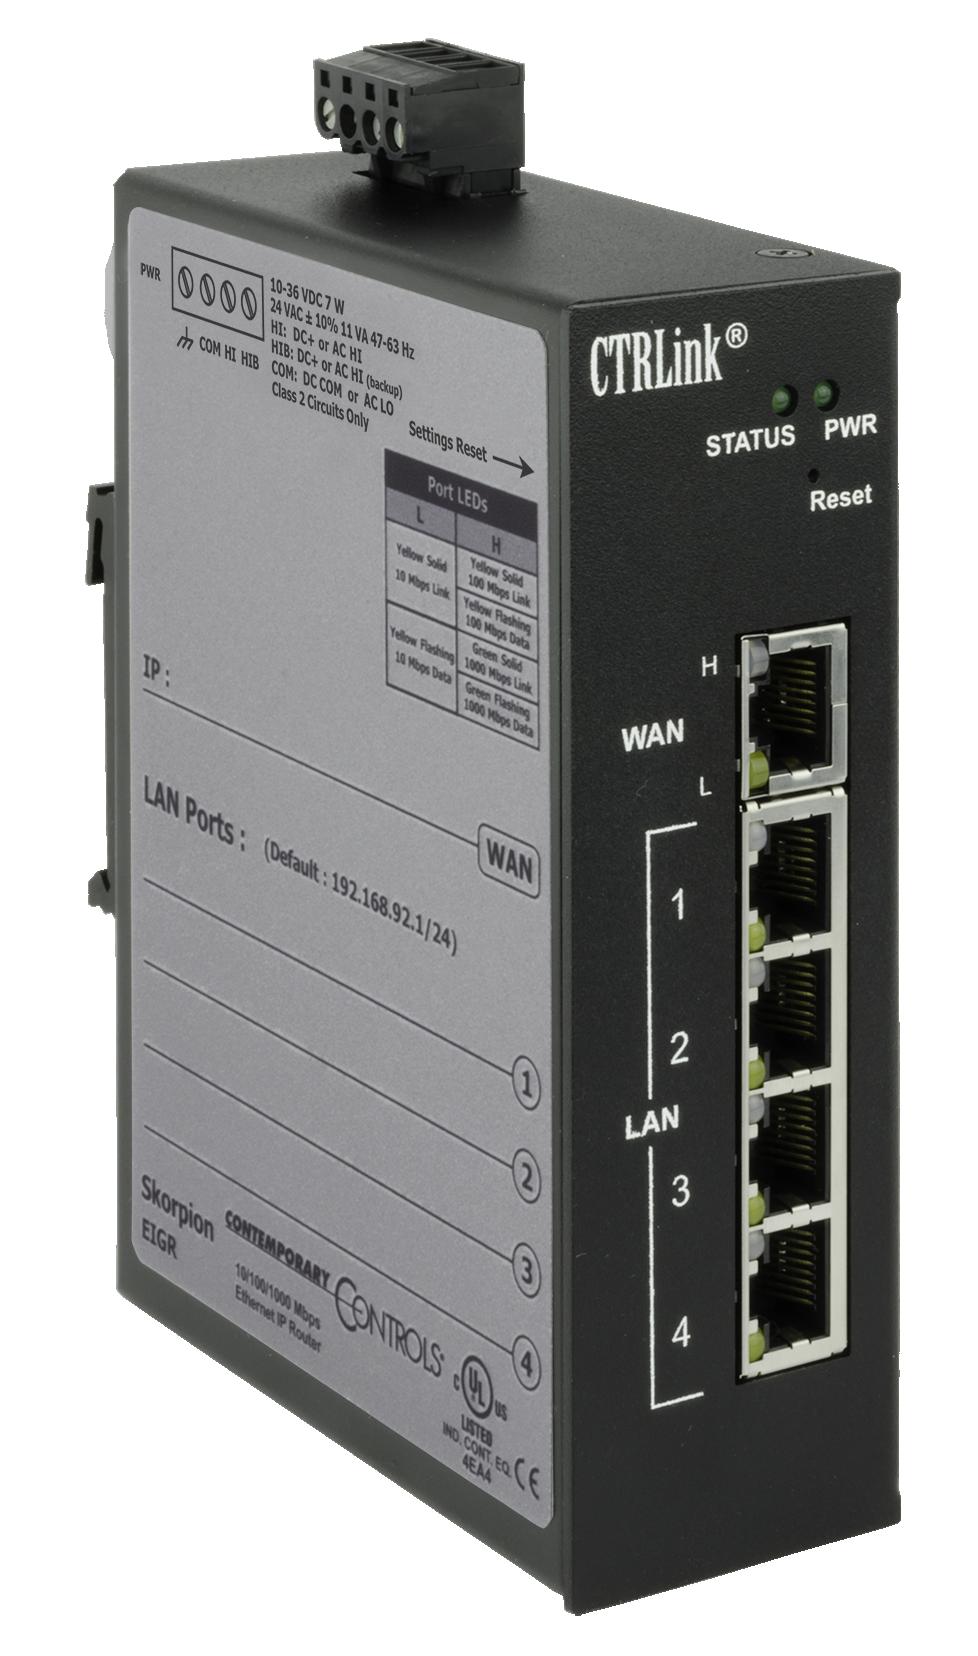 Data Sheet EIGR-E Series EIGR-E Skorpion Gigabit IP Router Although the EIGR-E has many of the same features found in high-end routers, it is simpler to install and commission.